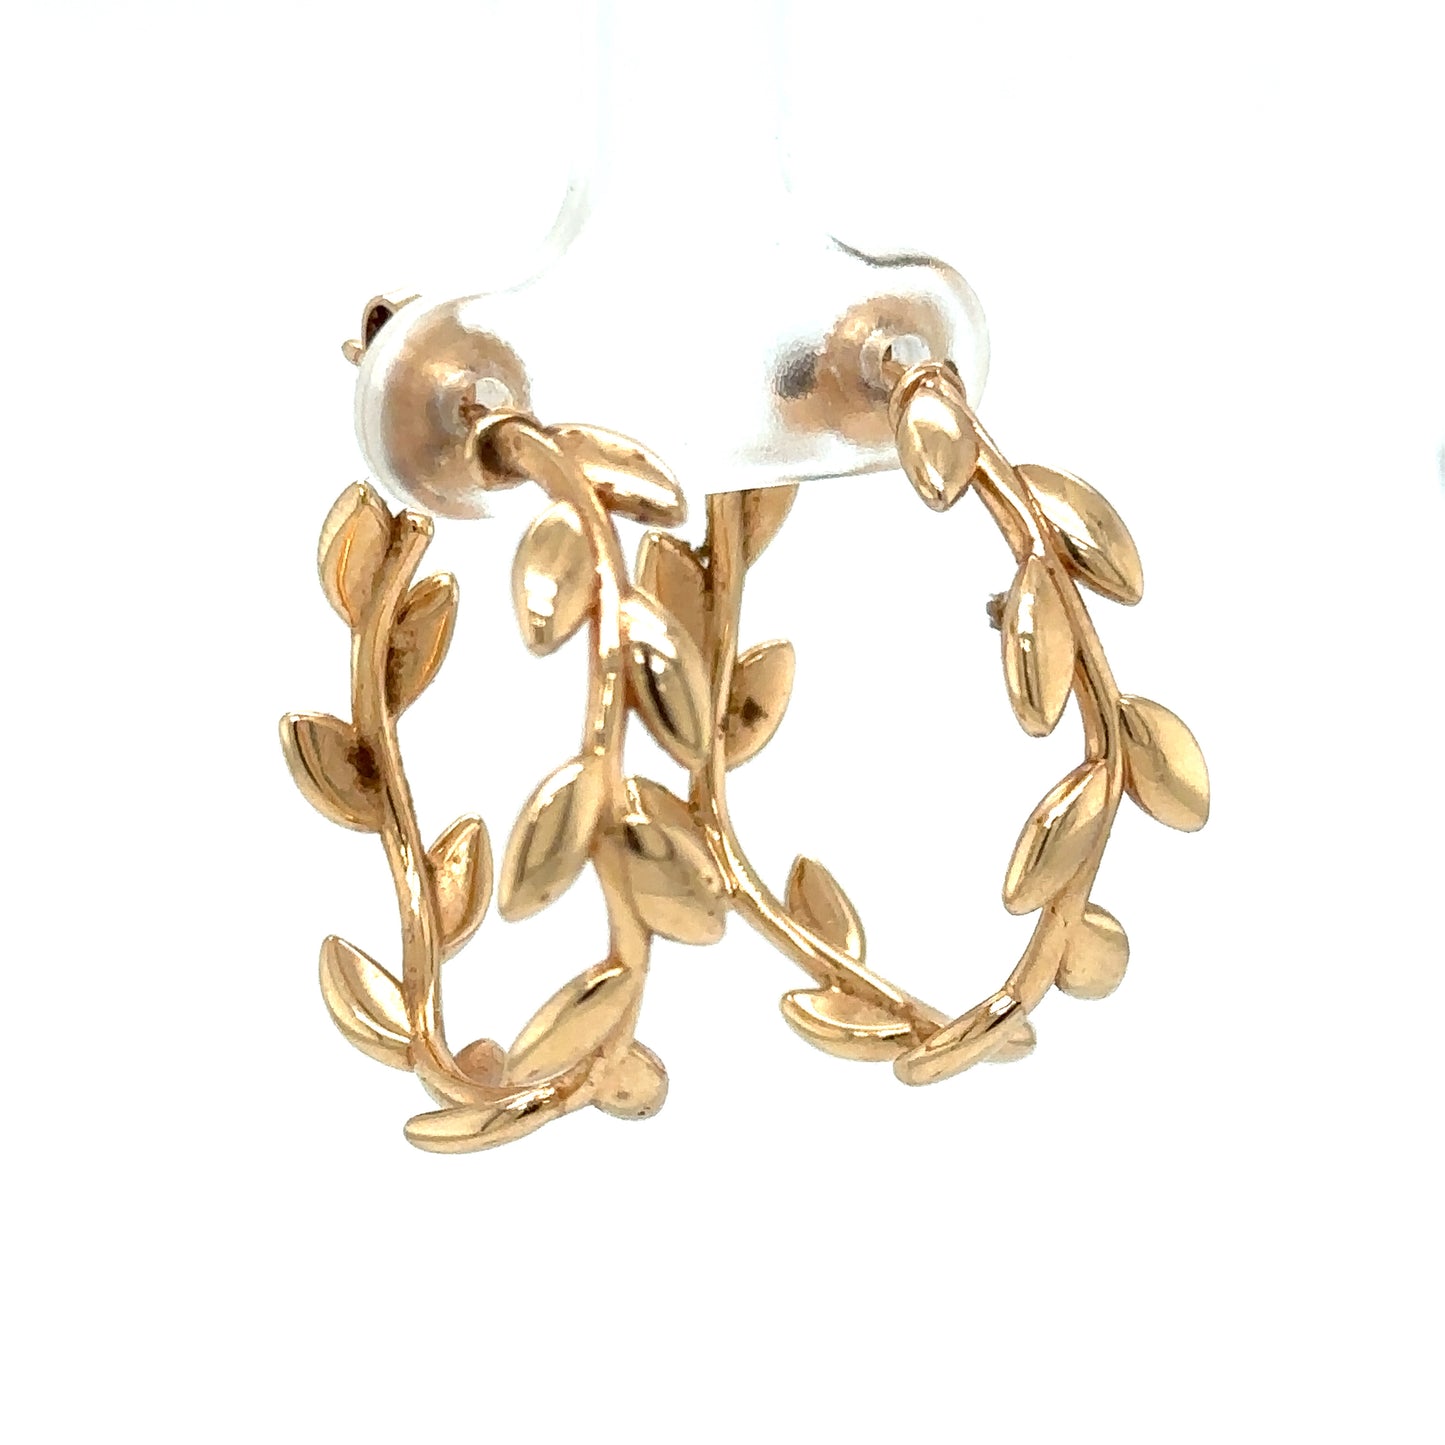 Tiffany & Co. Paloma Picasso Olive Leaf Hoop Earrings in 18K Gold